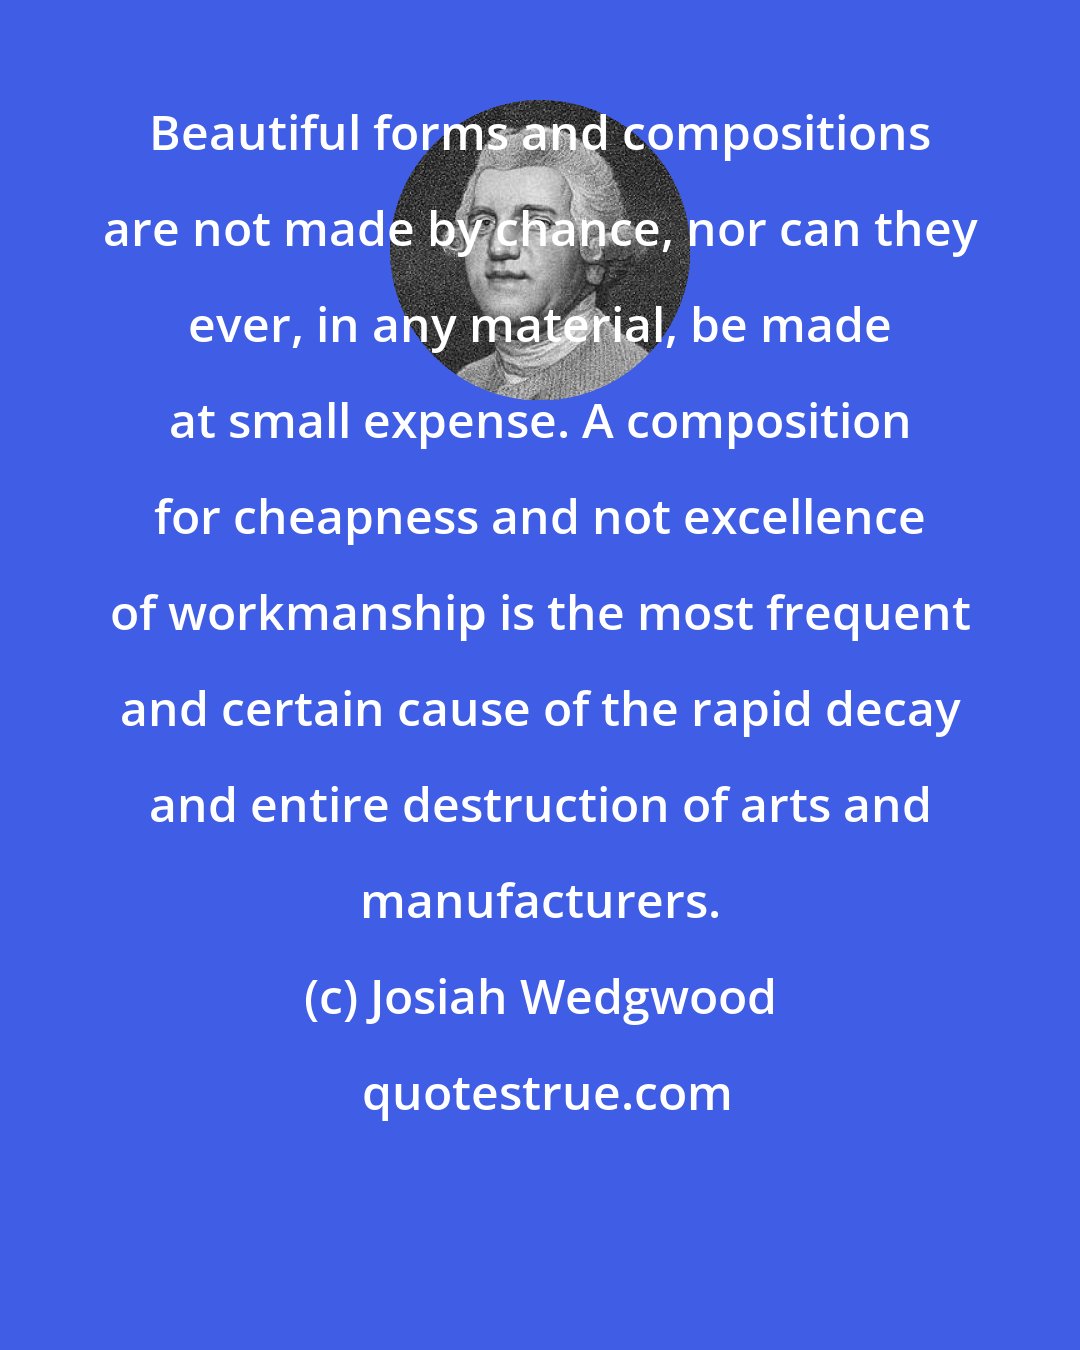 Josiah Wedgwood: Beautiful forms and compositions are not made by chance, nor can they ever, in any material, be made at small expense. A composition for cheapness and not excellence of workmanship is the most frequent and certain cause of the rapid decay and entire destruction of arts and manufacturers.